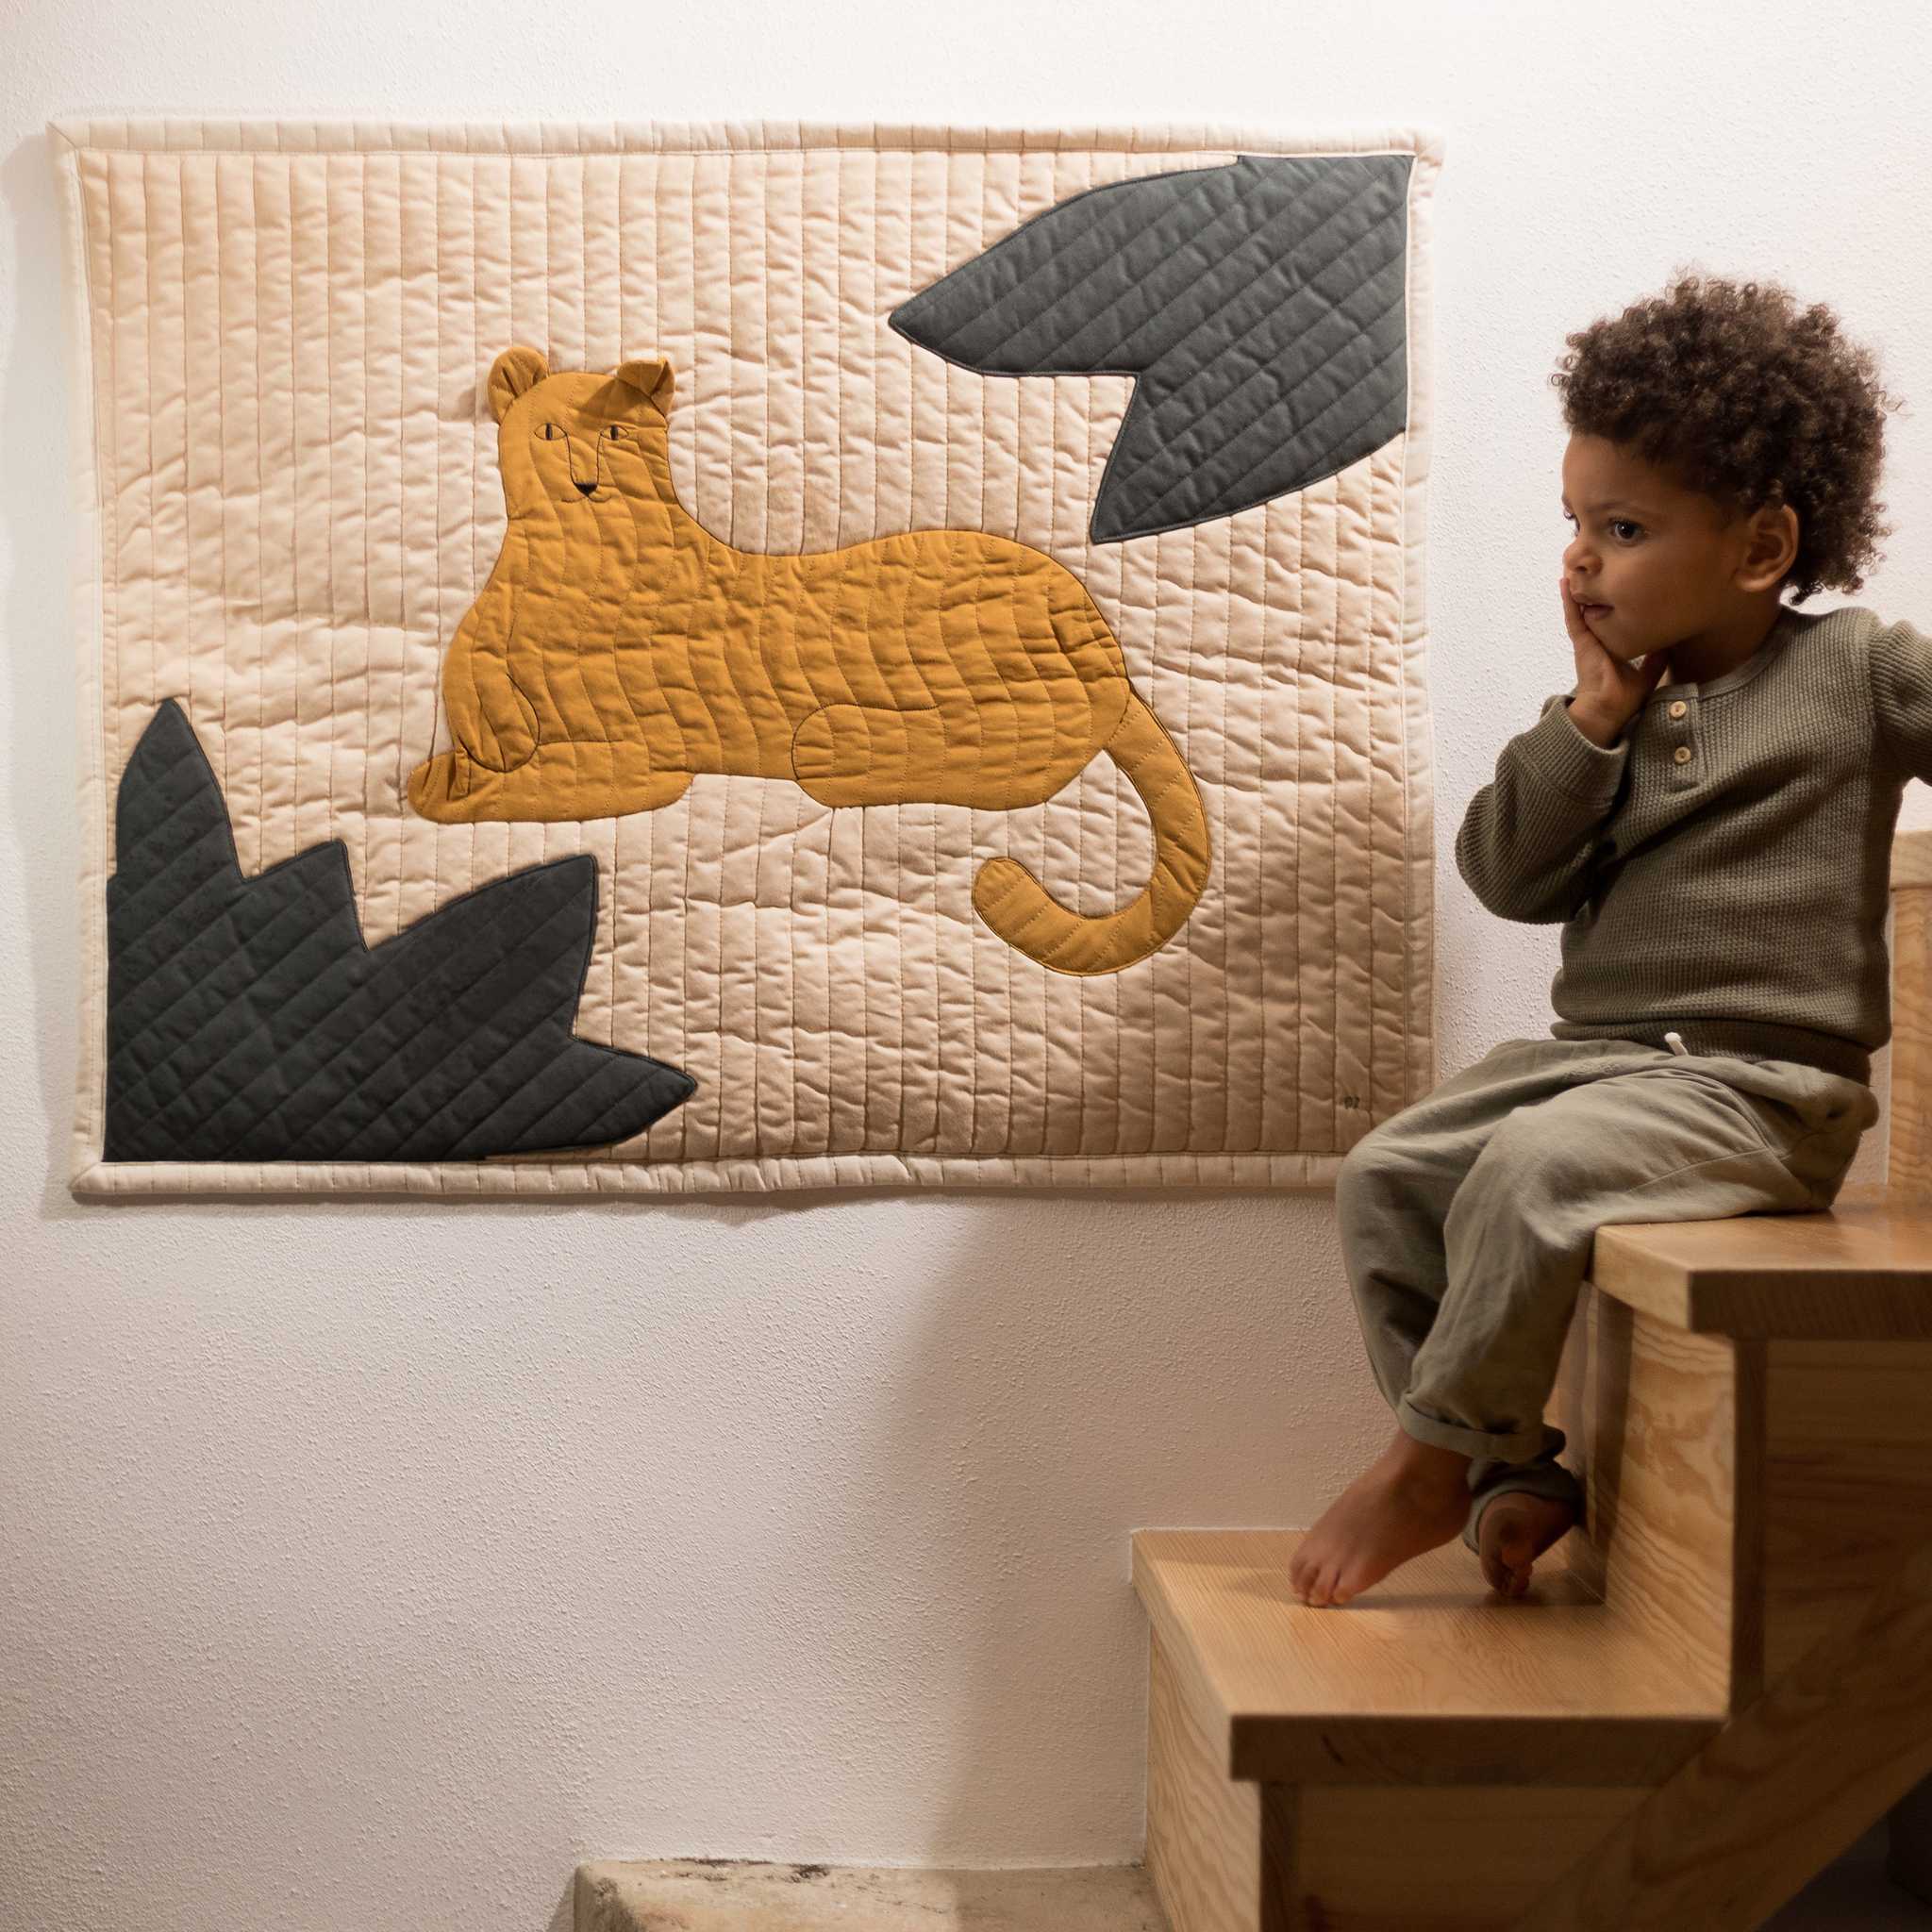 Nododinoz Leopard Quilted Blanket On Wall With Little Boy